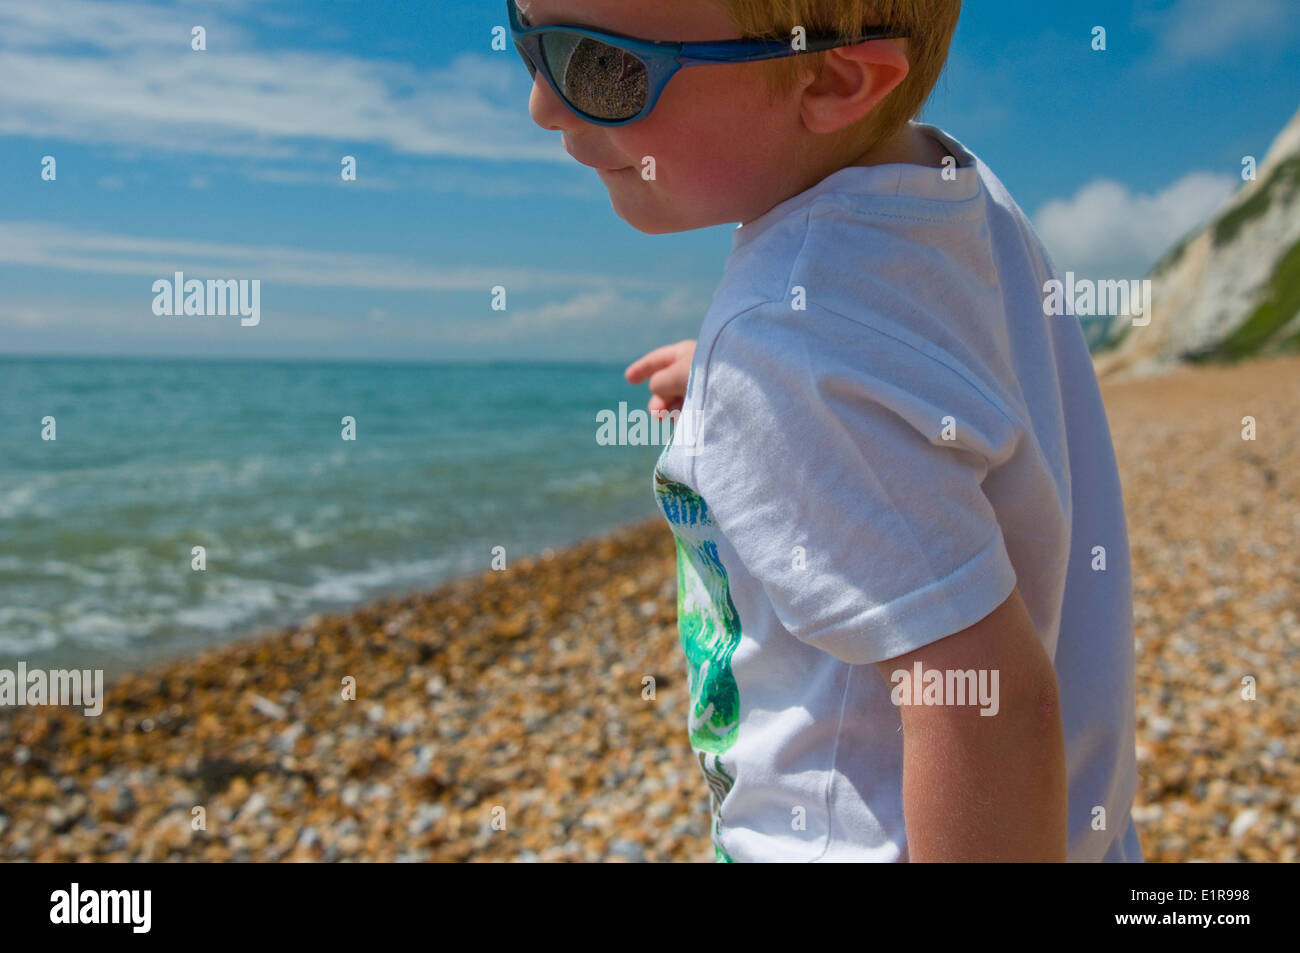 close up of a young boy playing on a pebble beach wearing sunglasses Stock Photo